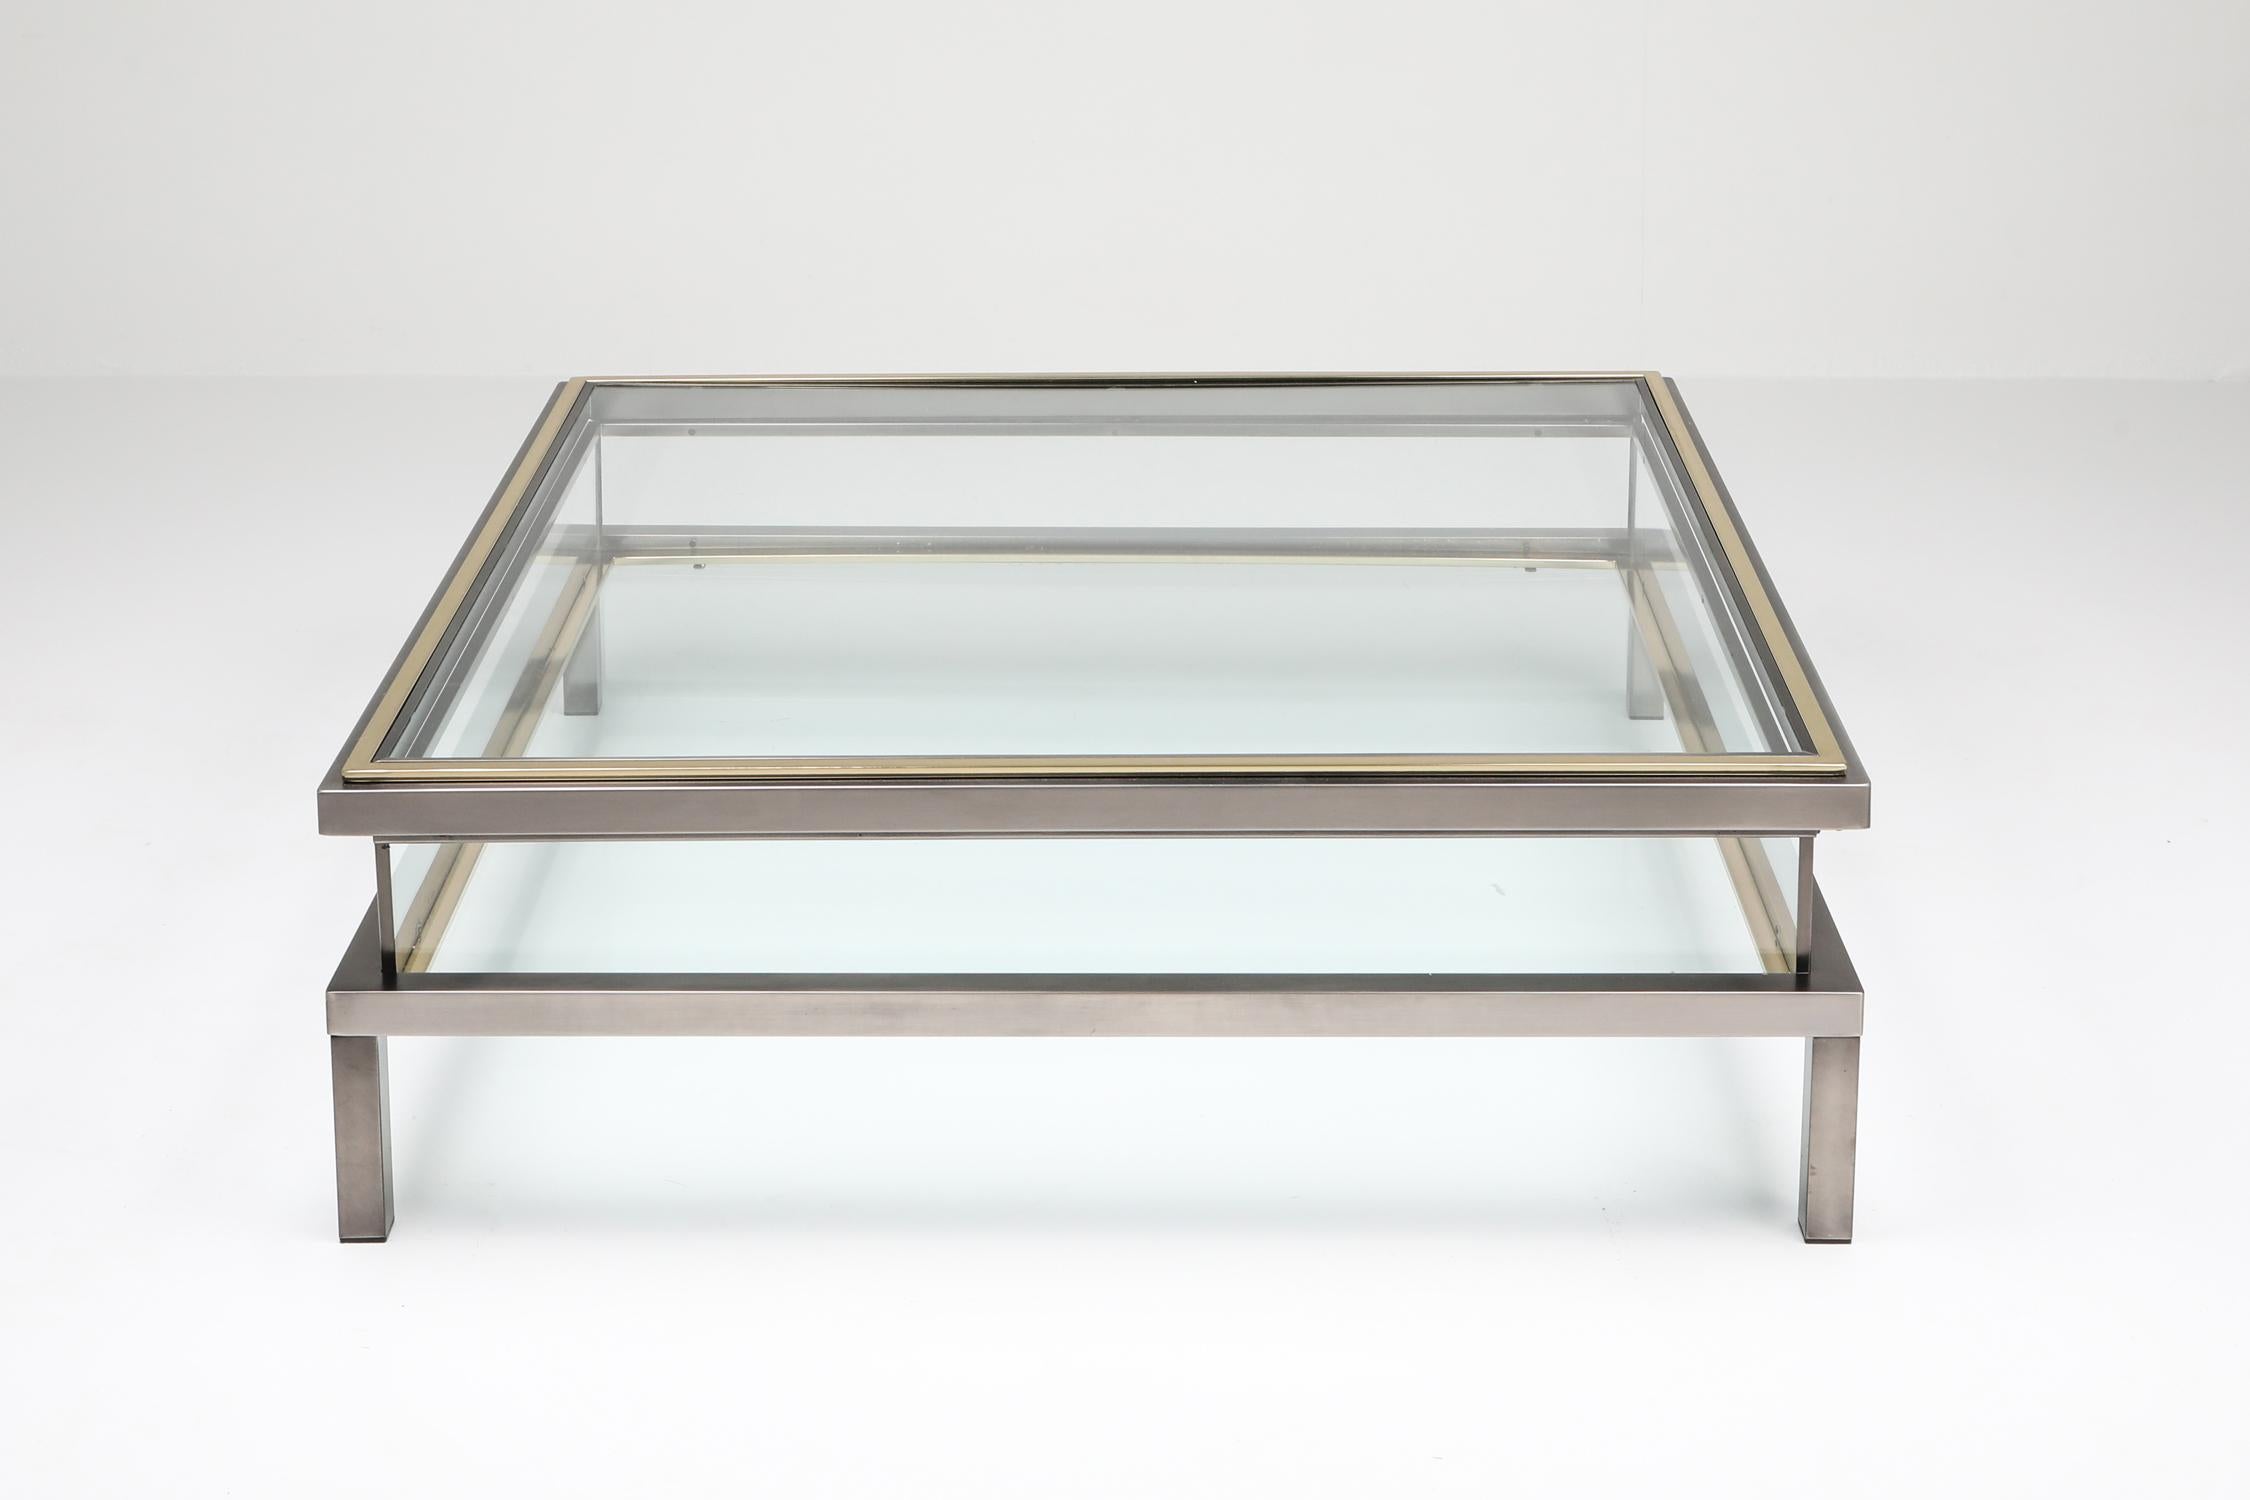 20th Century Maison Jansen Sliding Coffee Table in Chrome and Brass